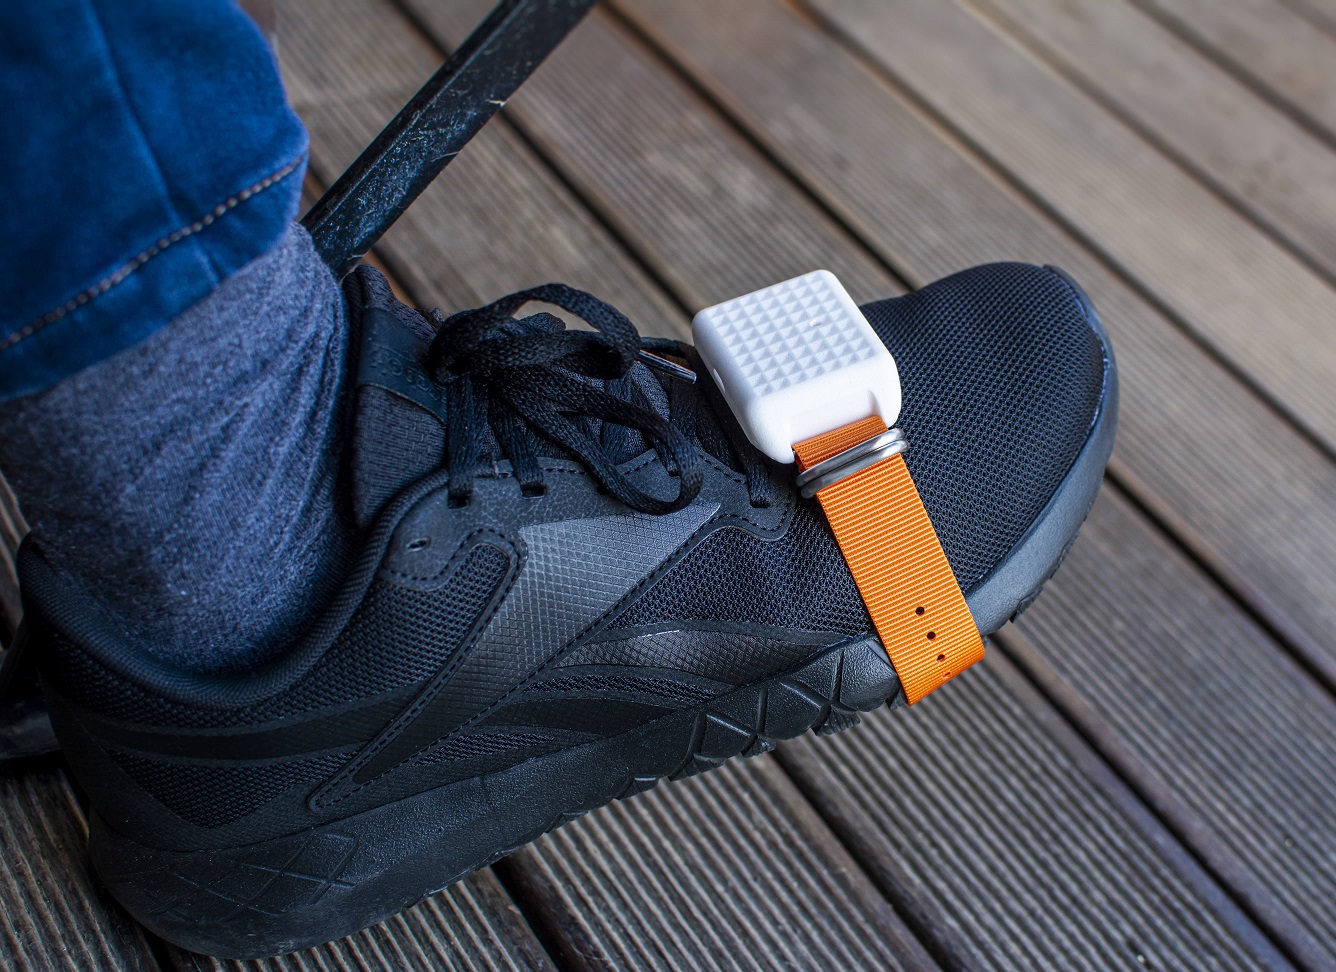 Featherlight mouse on a persons shoe secured by an orange strap.